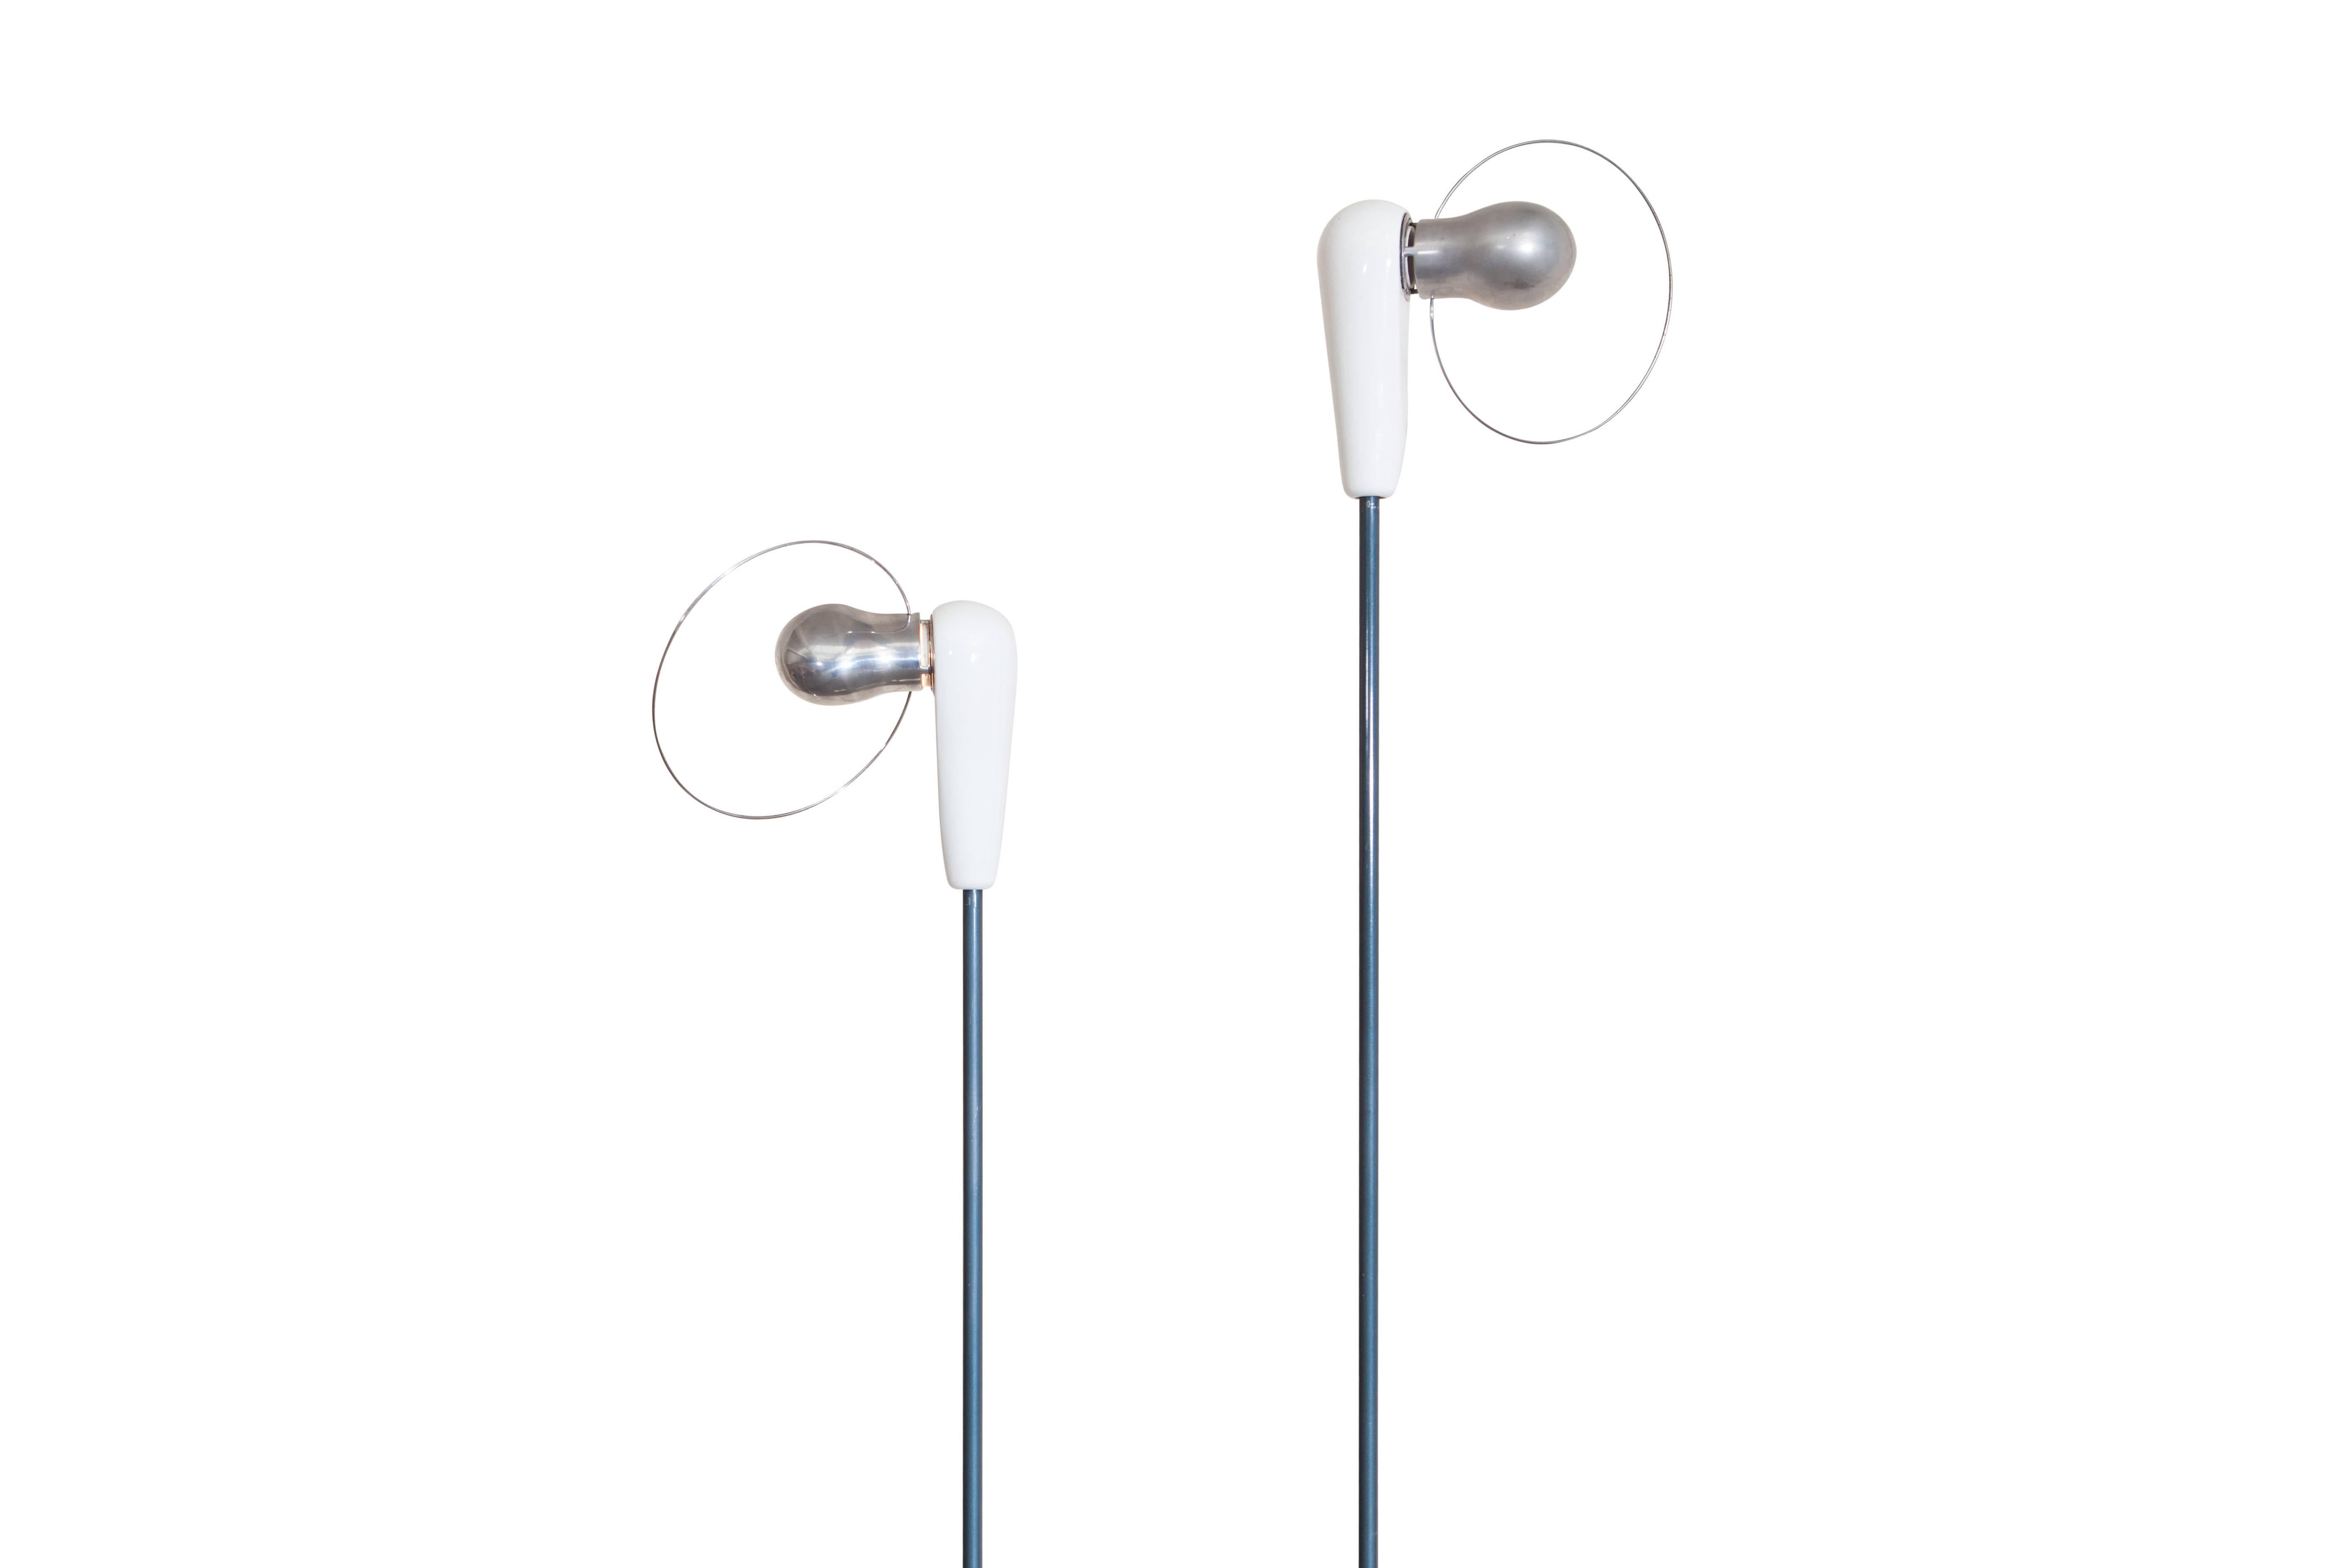 Castiglioni designed This pair of 'Bip Bip' floor lamps  in Italy for Flos in 1976.

Made of ceramic, steel, varnish and aluminium.

H 193 + H 215 cm, diameter 23 cm. 

These are no longer in production
one small repair on the ceramic base.
  